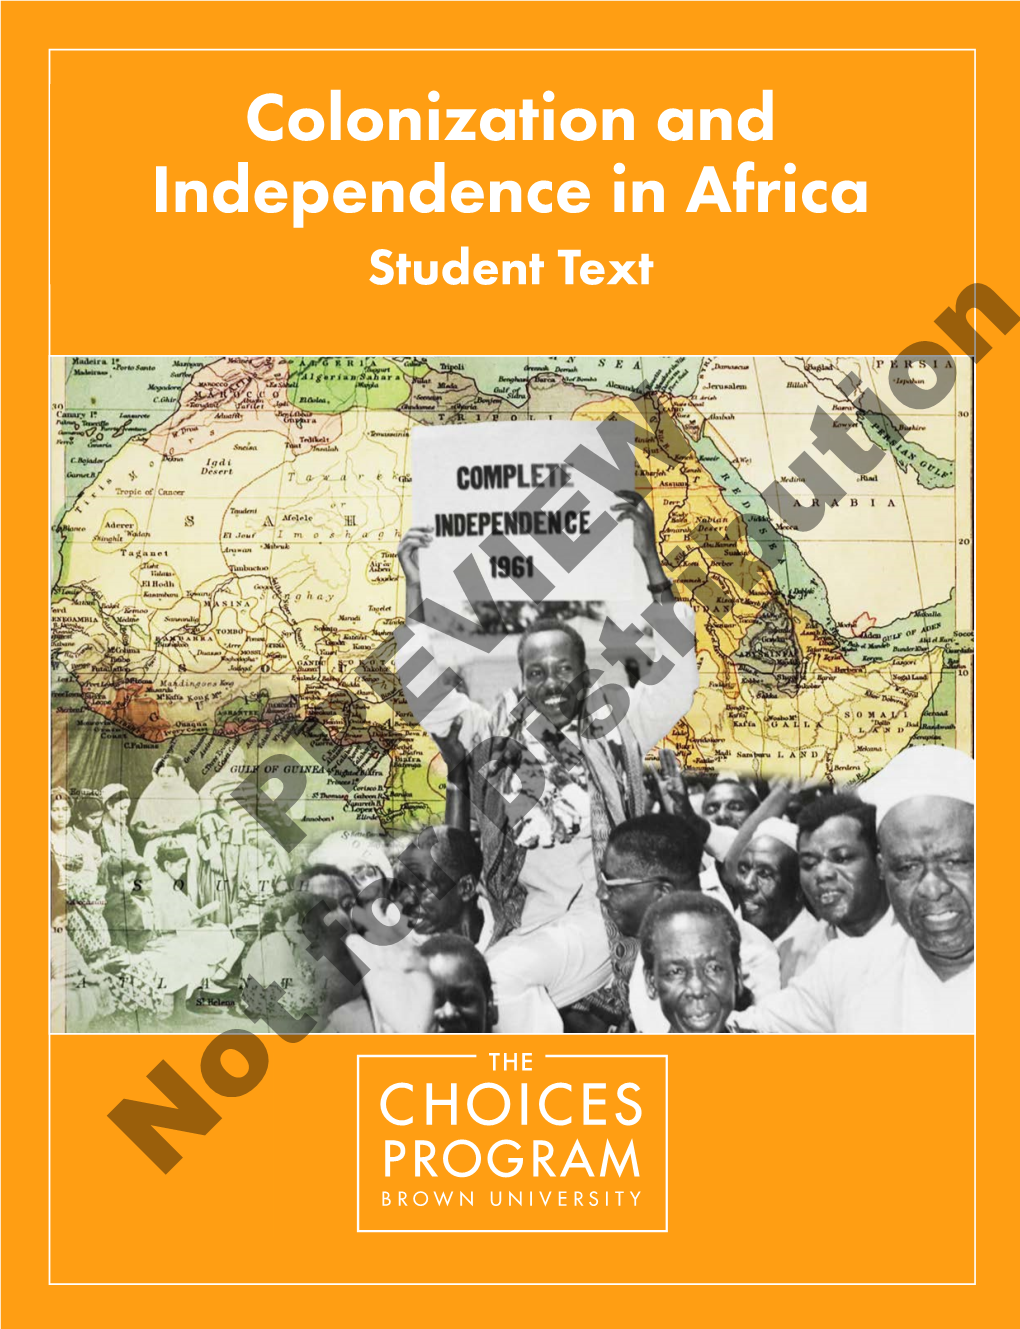 Colonization and Independence in Africa Student Text